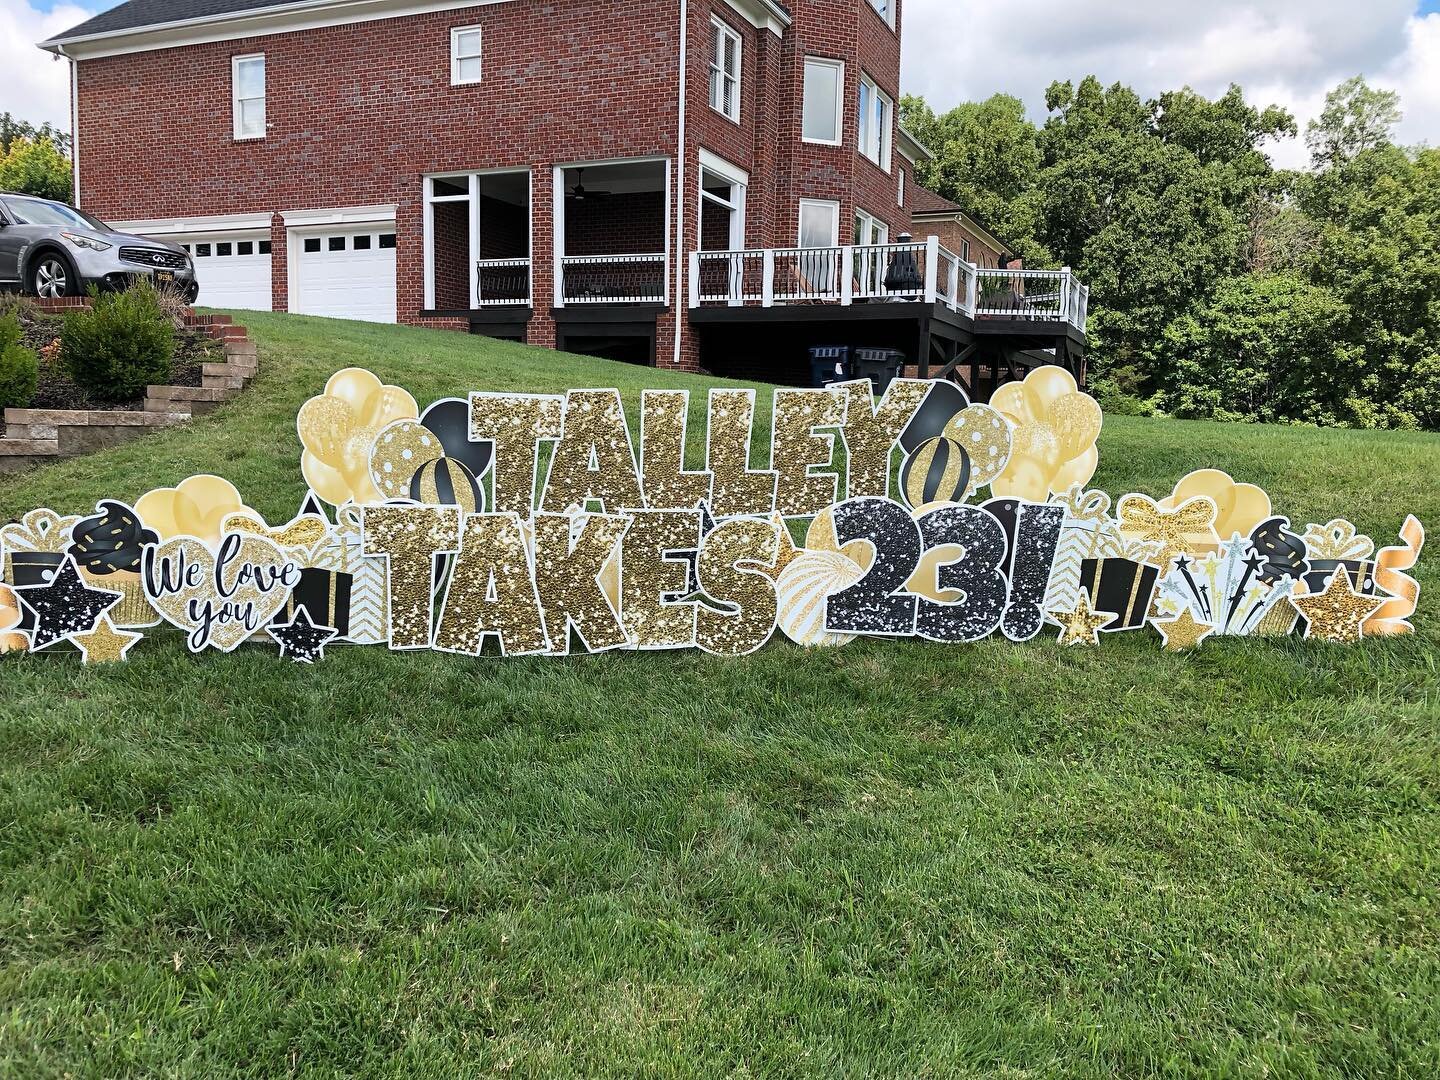 We loved being a part of this custom backyard party! Talley takes 23! 🥳🤩

#Harrisburgyardcard #harrisburgnc #concordnc #midlandnc #yardcard #yardsign #happybirthday #party #celebrate #sayitintheyard #supportlocal